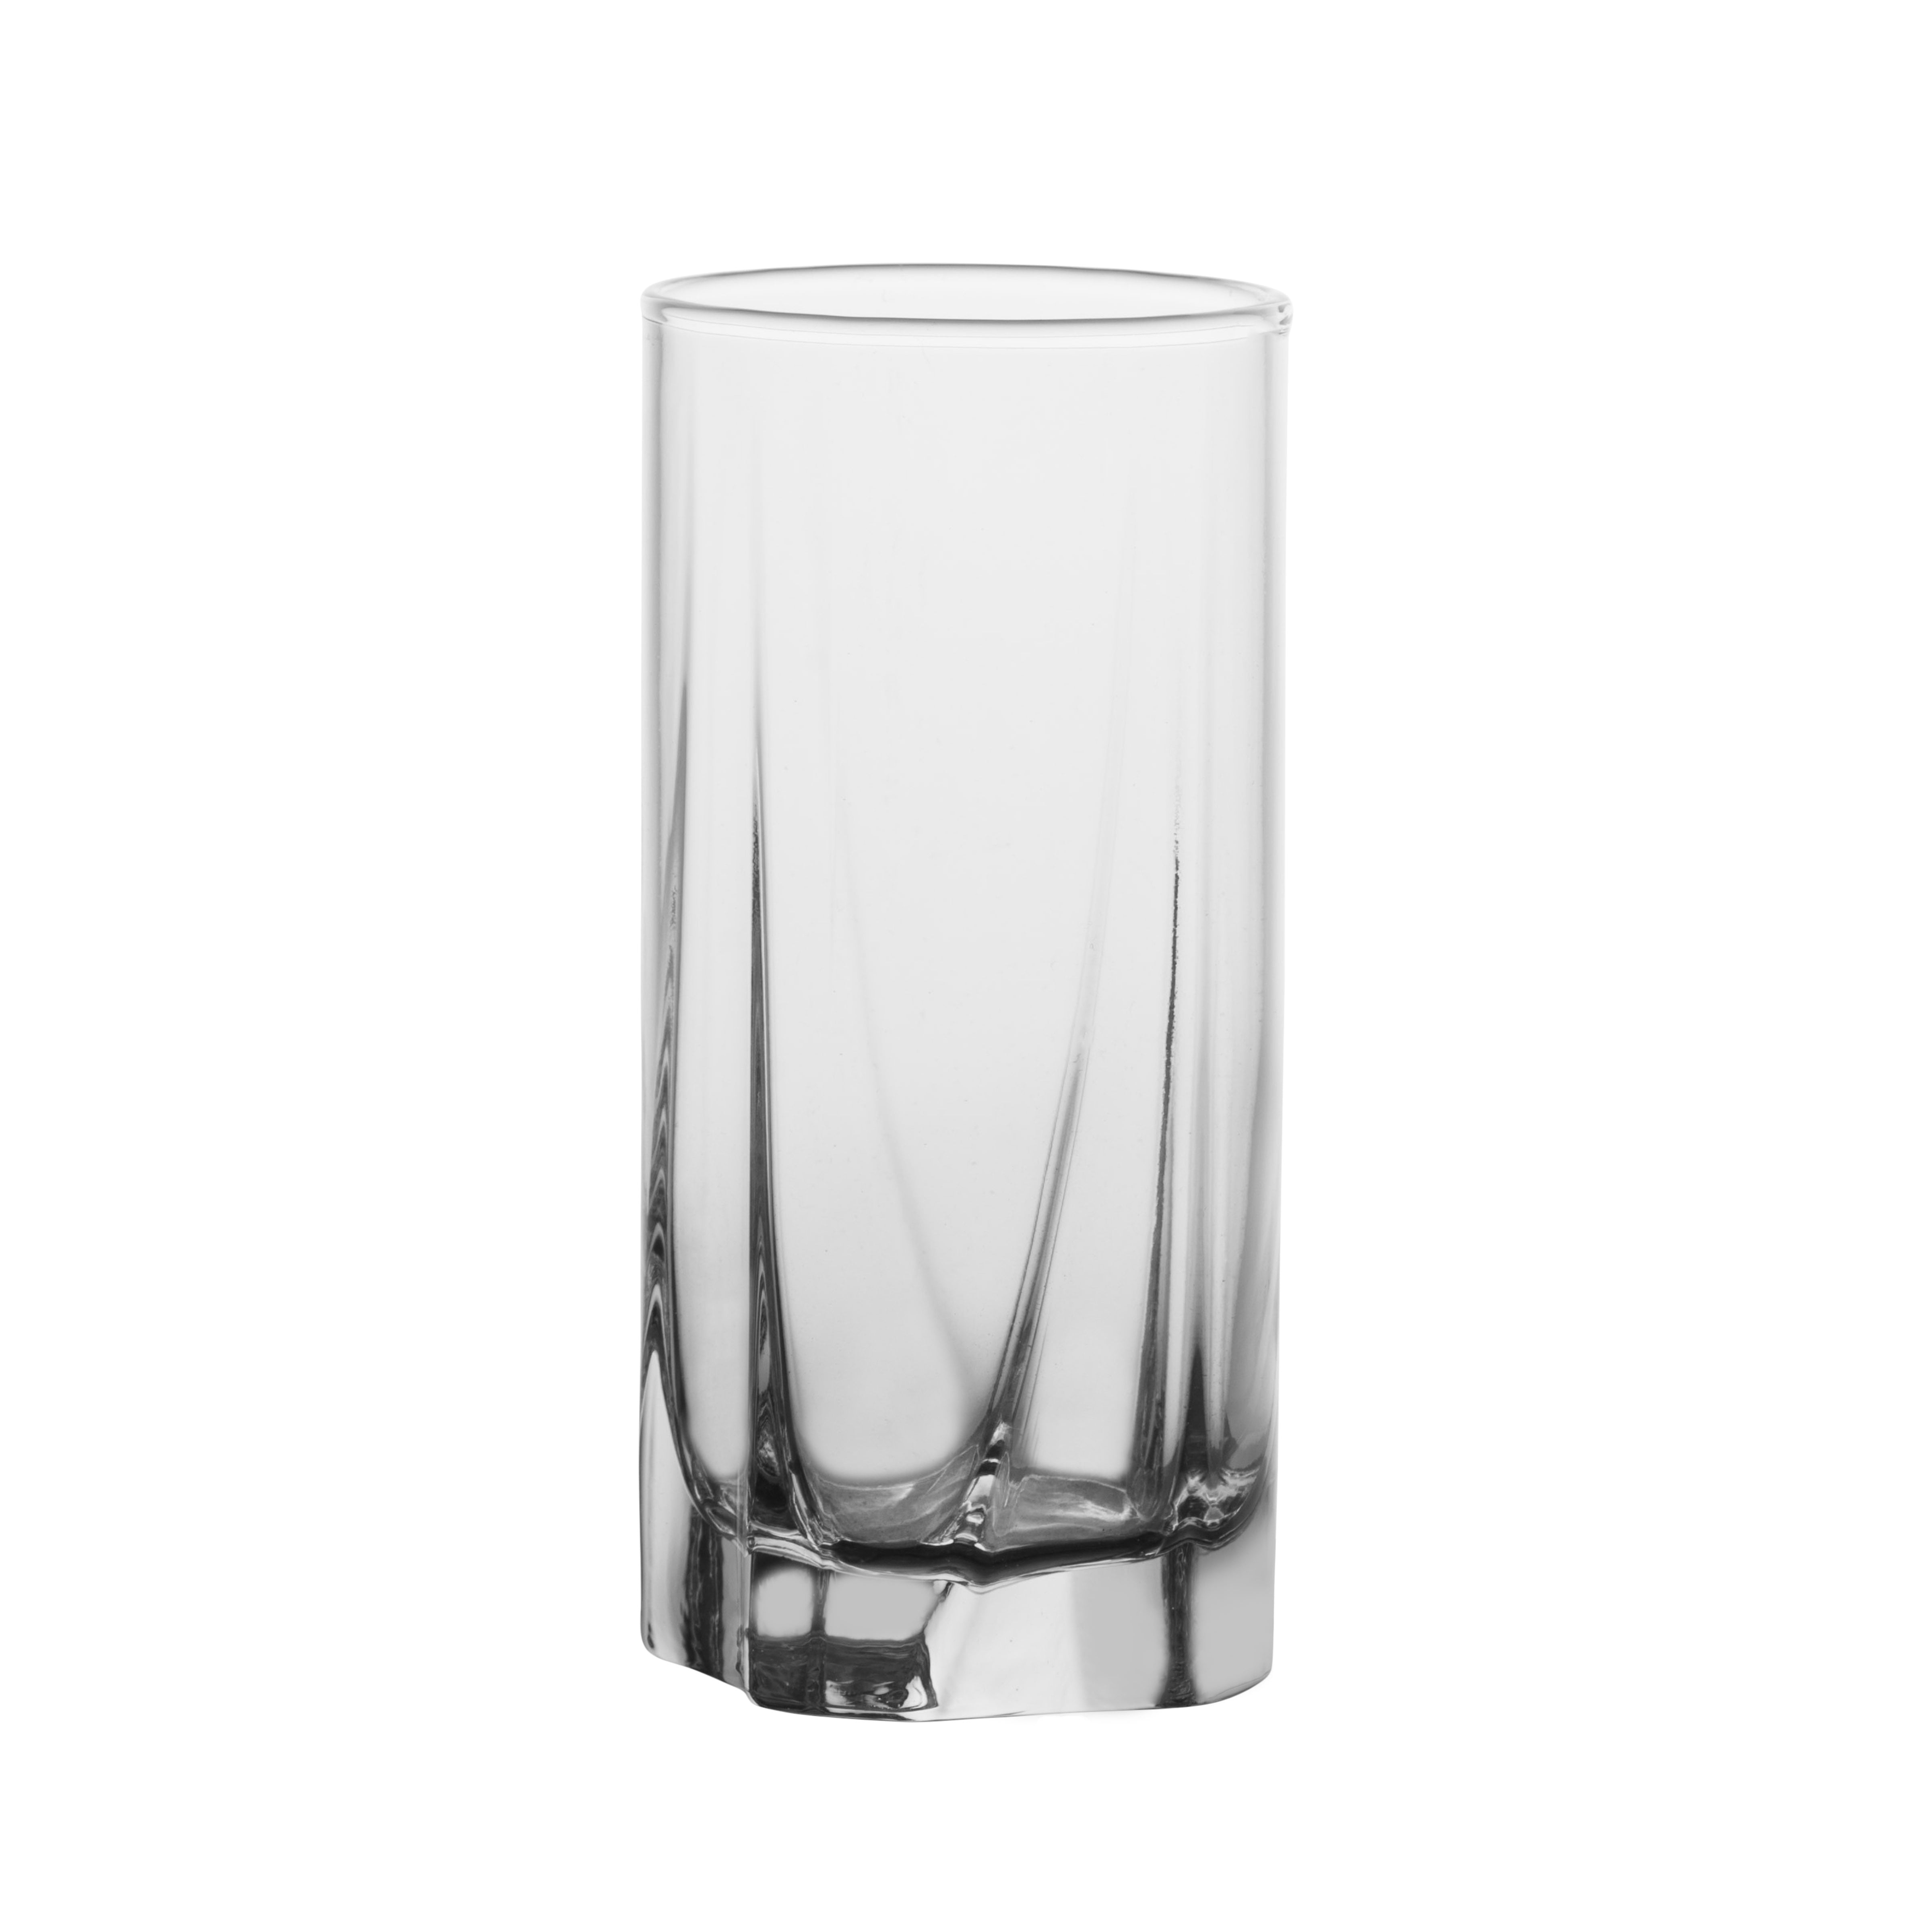 Vikko Clear 12.25 Ounce Classic Highball Drinking Glasses Juice or Cocktails Dishwasher Safe For Water Soda Set of 6 Clear Glass Tumblers Thick and Durable Heavy Base 